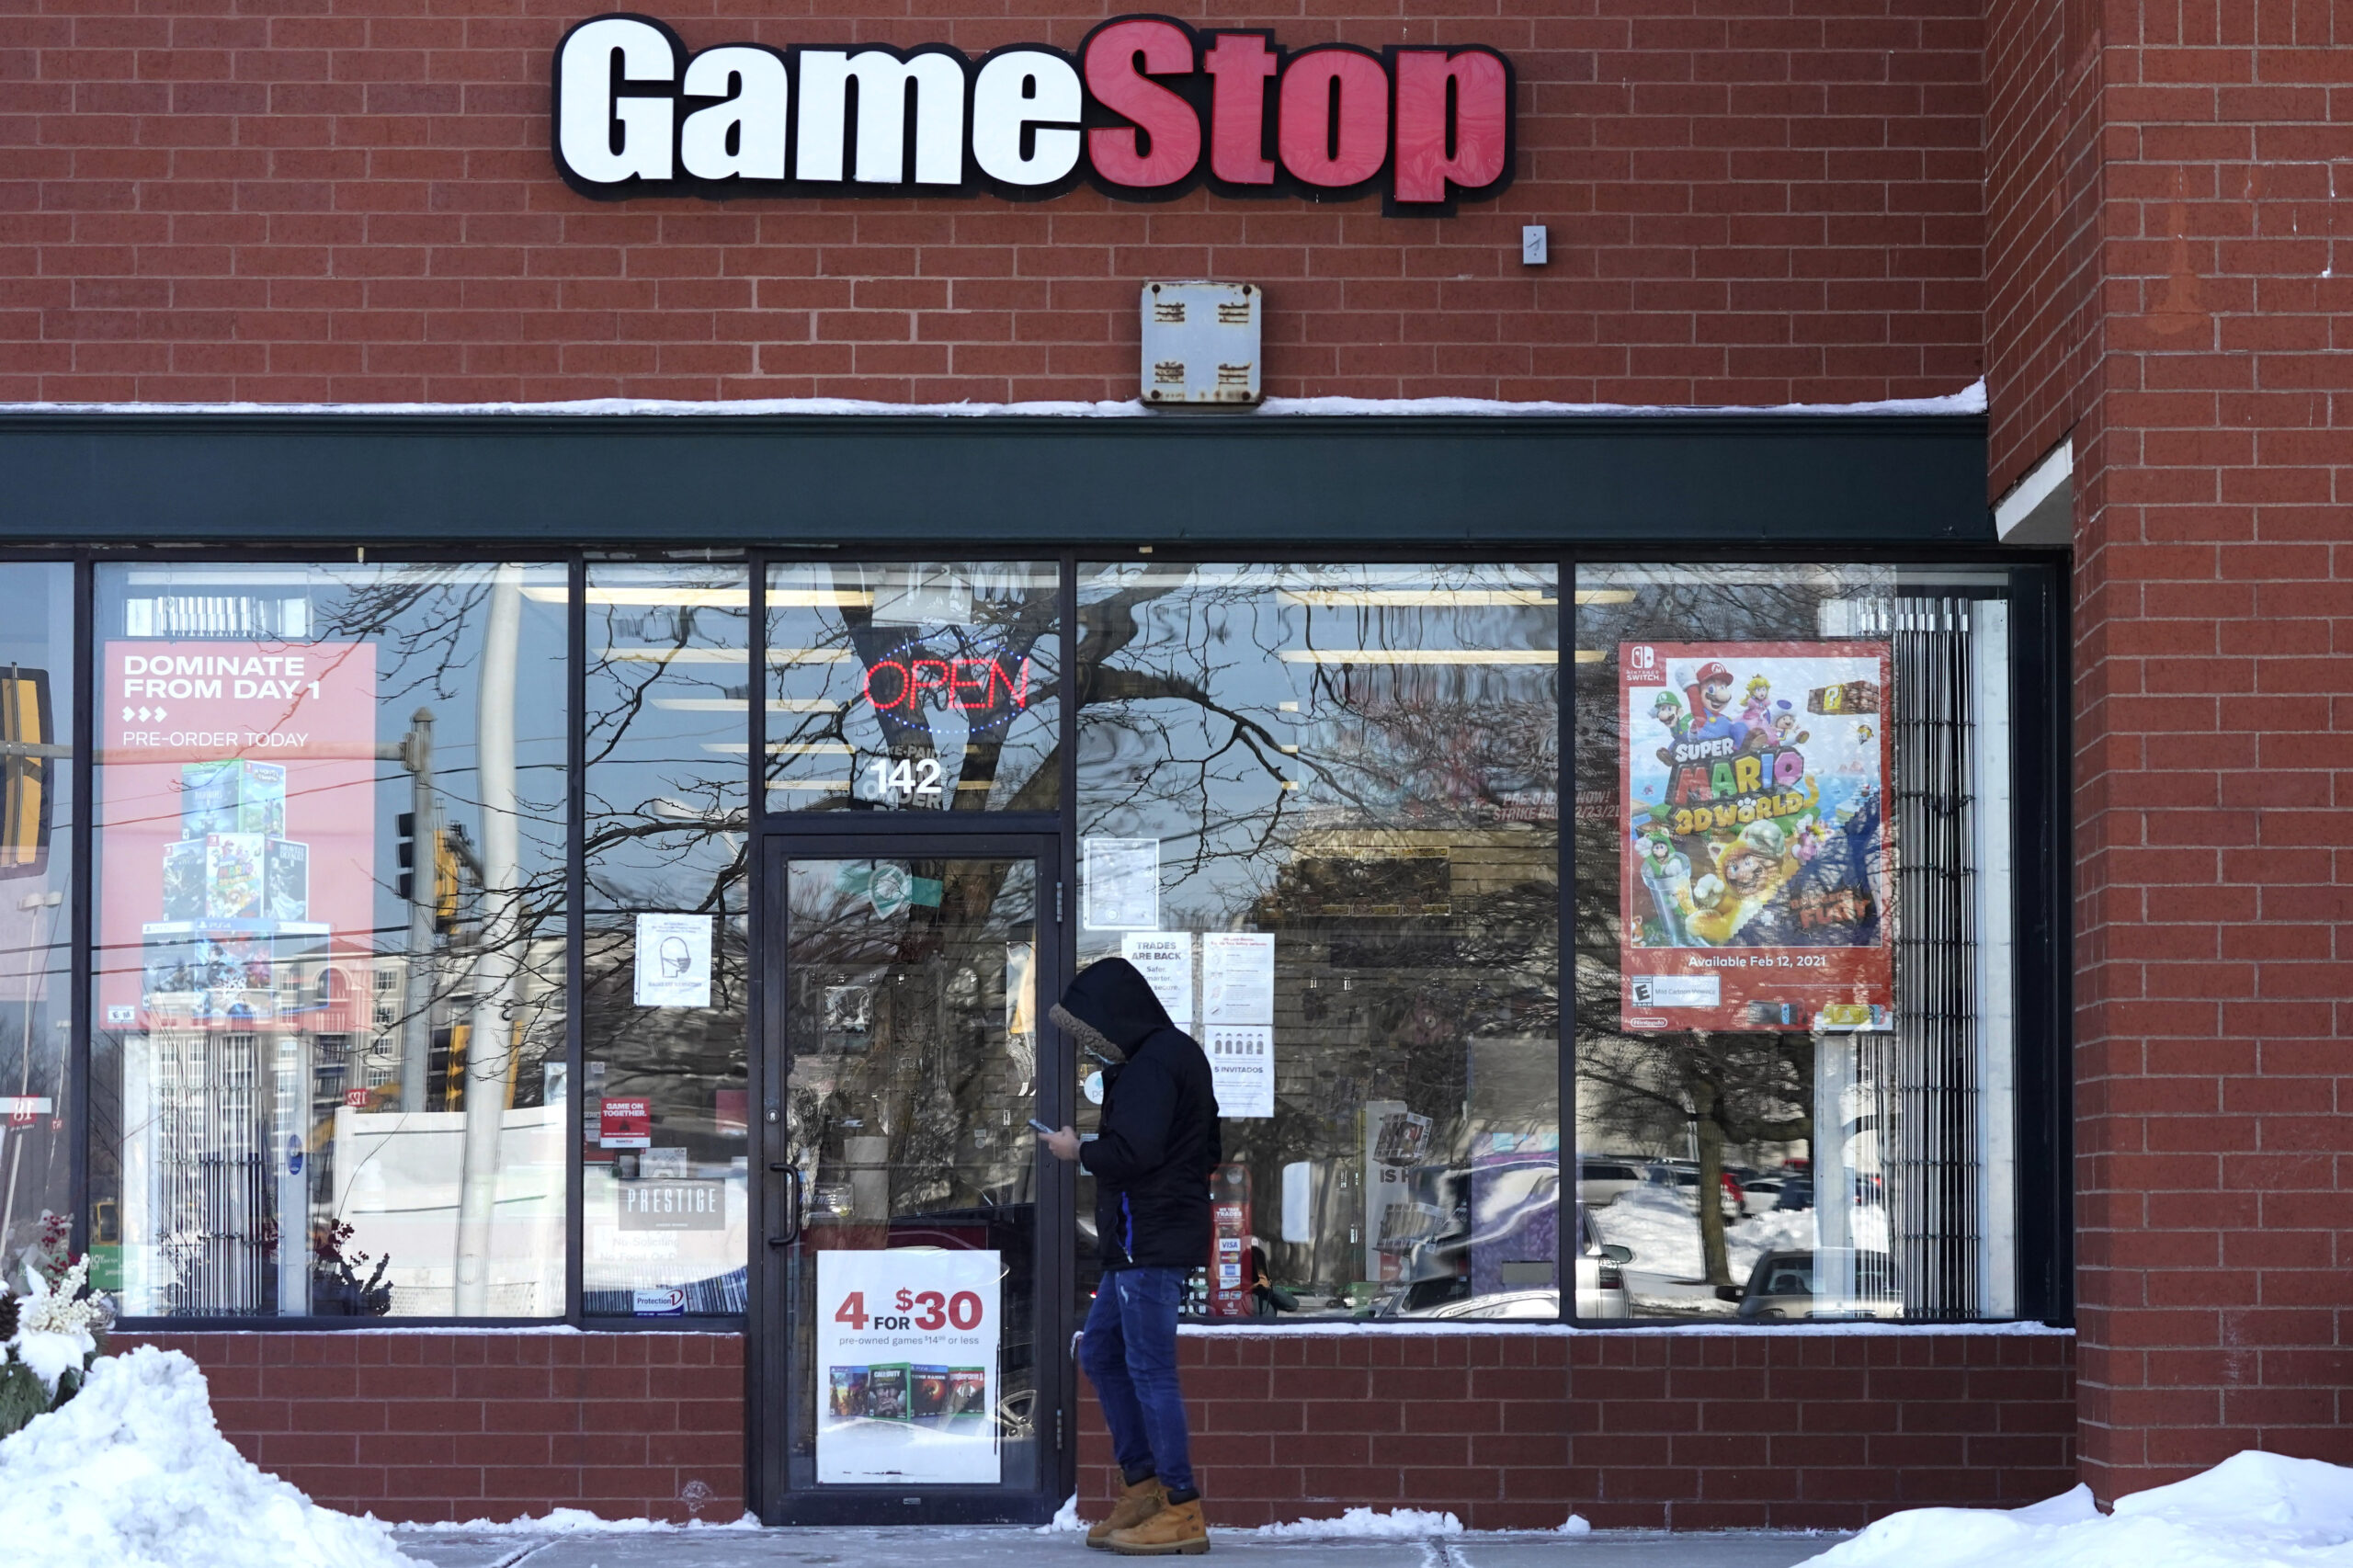 FILE - In this Jan. 28, 2021 file photo, a customer checks on his cellphone as he walks to a GameStop store in Vernon Hills, Ill. The frenzy around GameStop’s stock may have quieted down, but the outsized influence small investors had in the saga is likely to stick around. While no one expects another supernova like GameStop, the tools that smaller investors employed to supercharge its stock can be used again and again. (AP Photo/Nam Y. Huh, File)